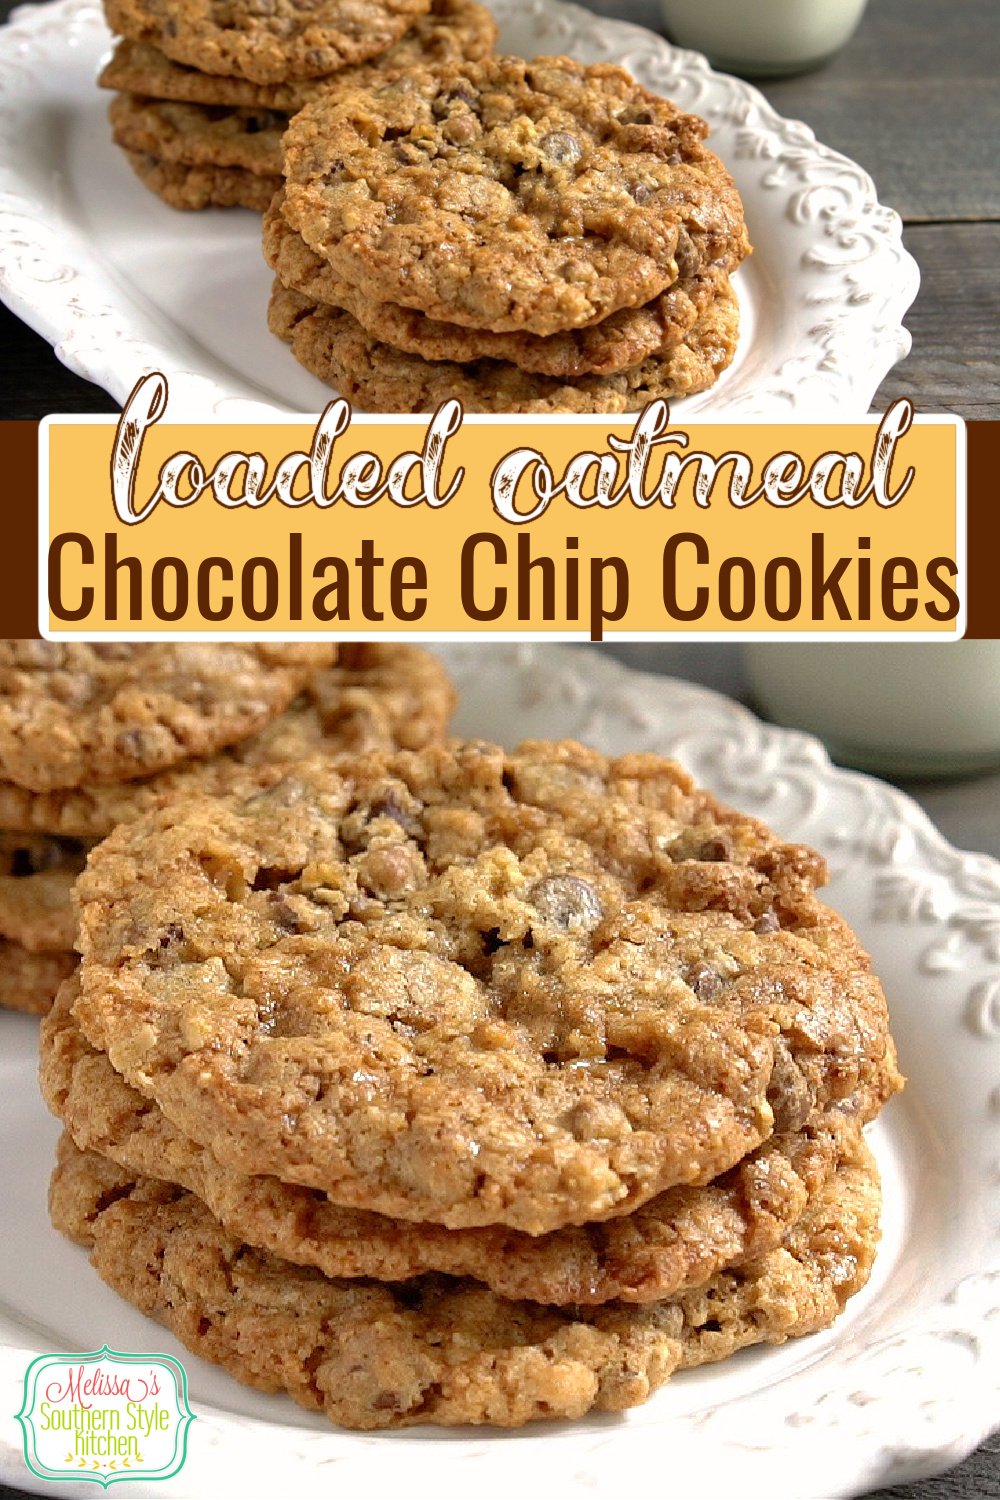 These loaded-up Oatmeal Chocolate Chip Cookies won't last long in your cookie jar #oatmealcookies #chocolatechipcookies #loadedoatmealcookies #oatmealchocolatechipscookies #cookies #cookierecipes #holidaybaking #christmascookies #southernfood #southernrecipes #chocolate via @melissasssk